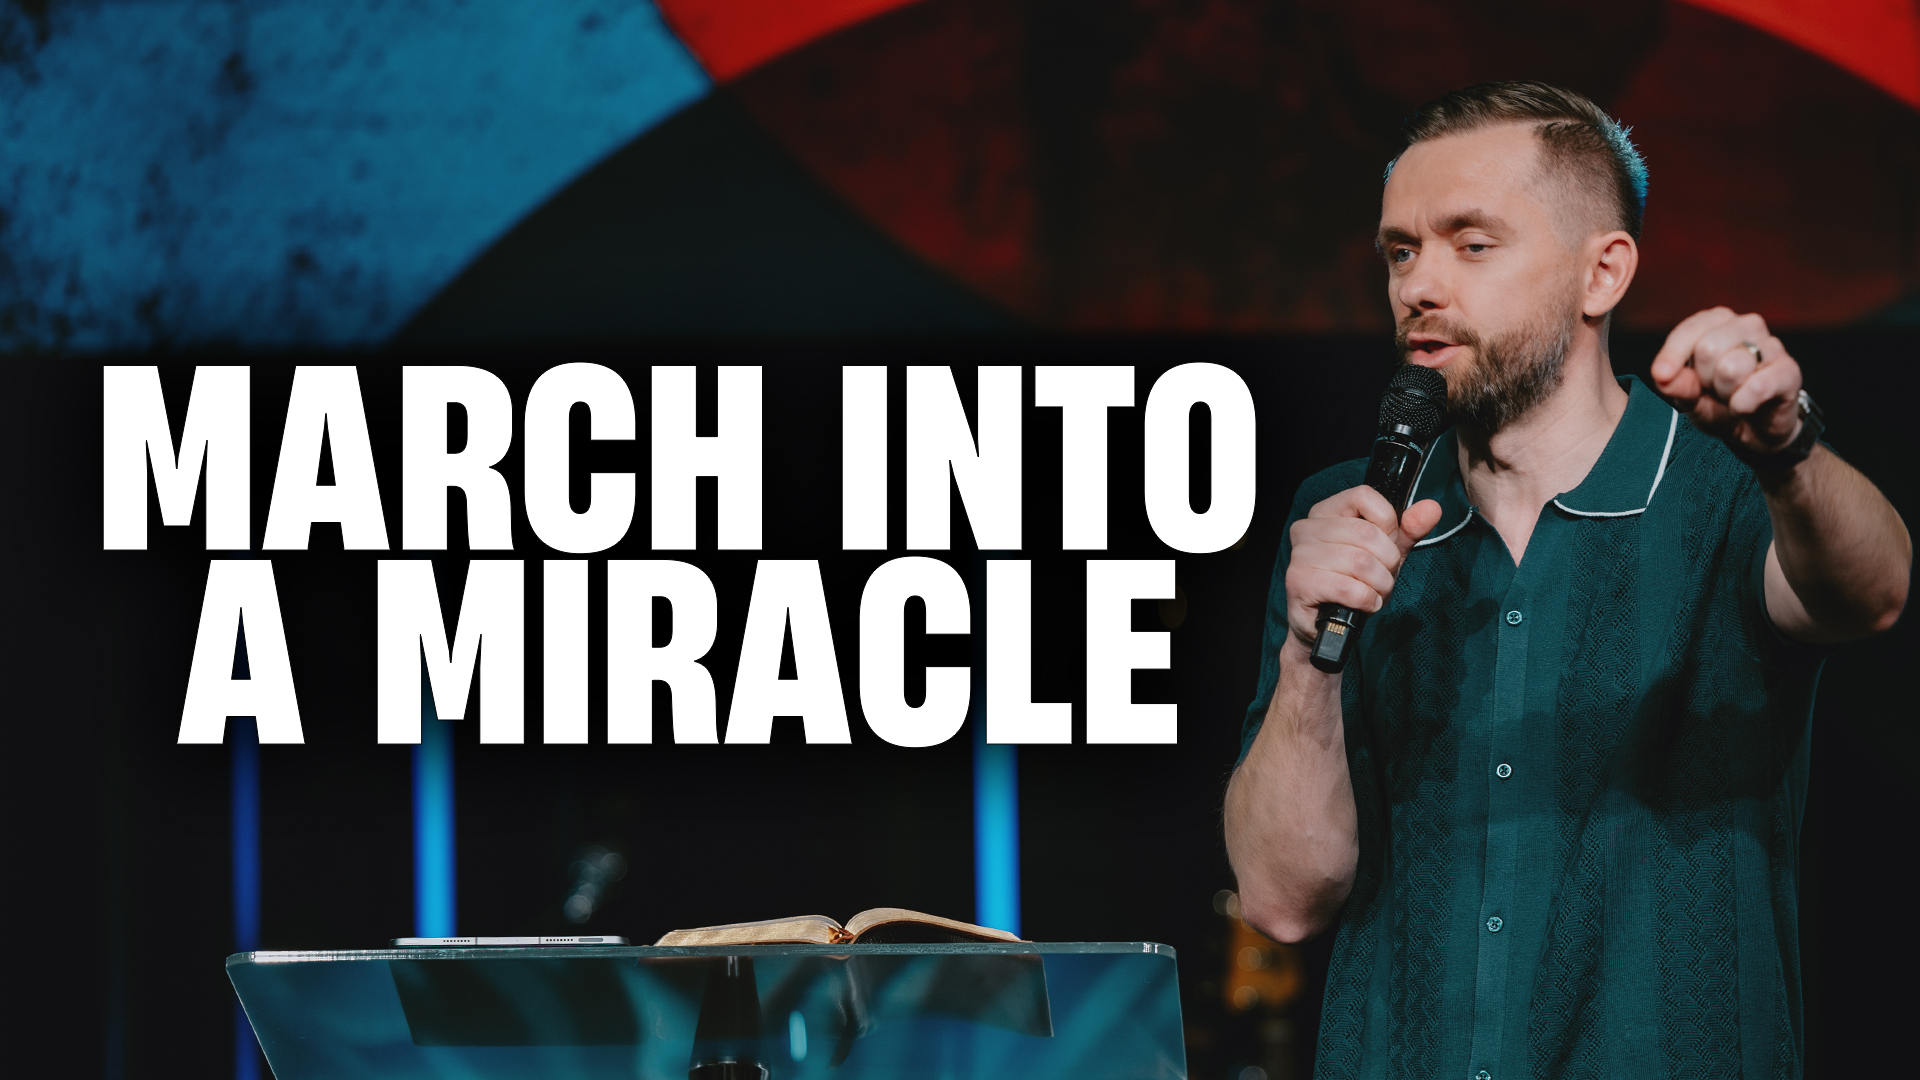 Featured Image for “March into a Miracle ”